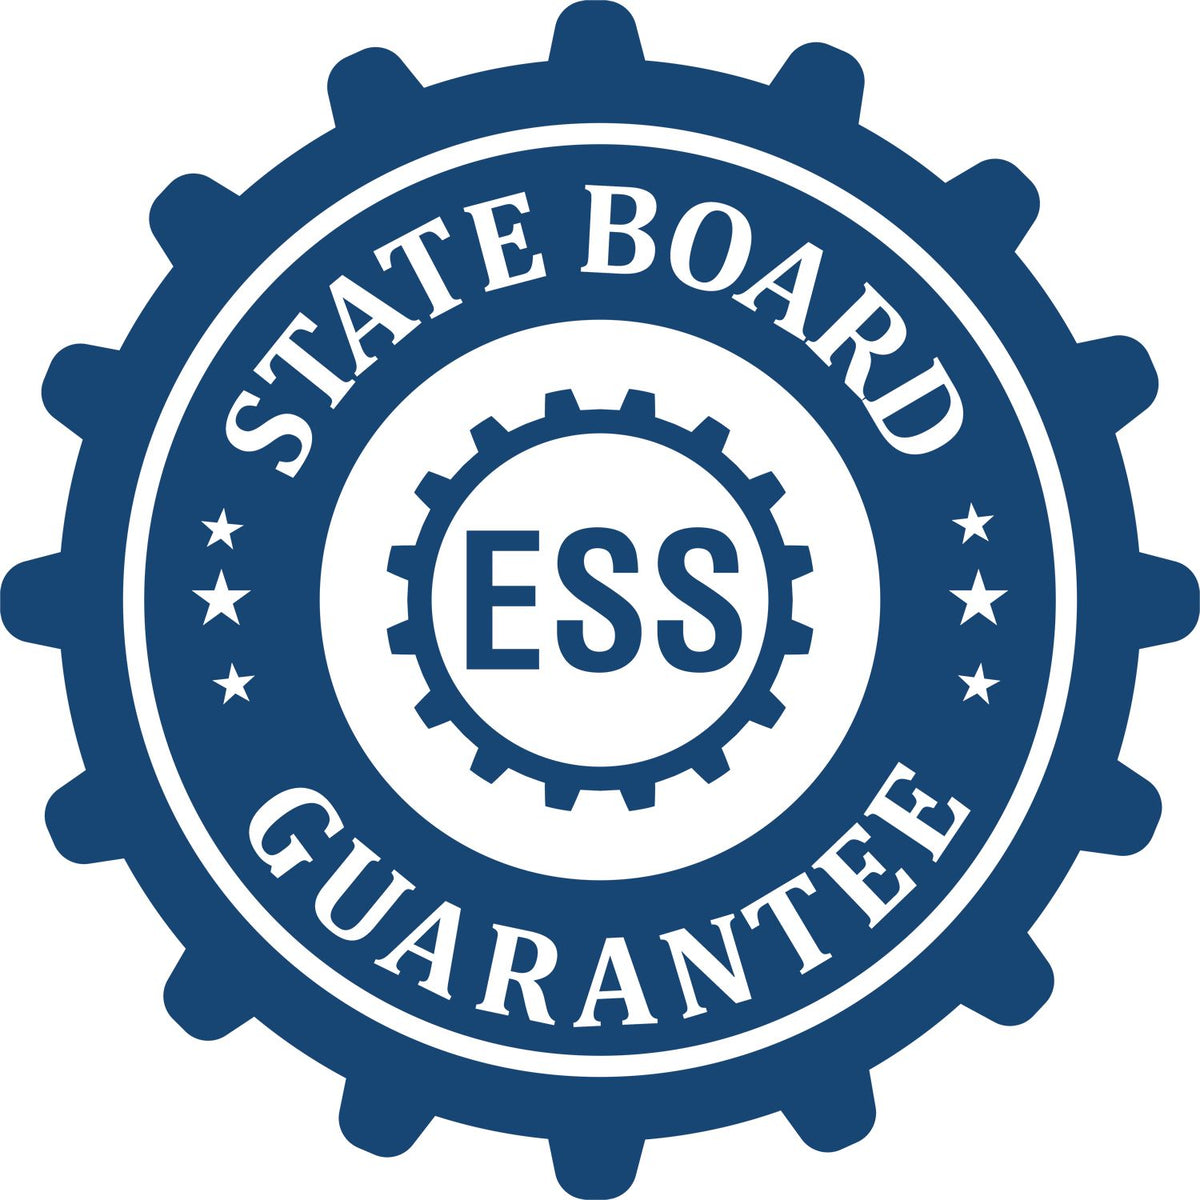 An emblem in a gear shape illustrating a state board guarantee for the Heavy-Duty Connecticut Rectangular Notary Stamp product.